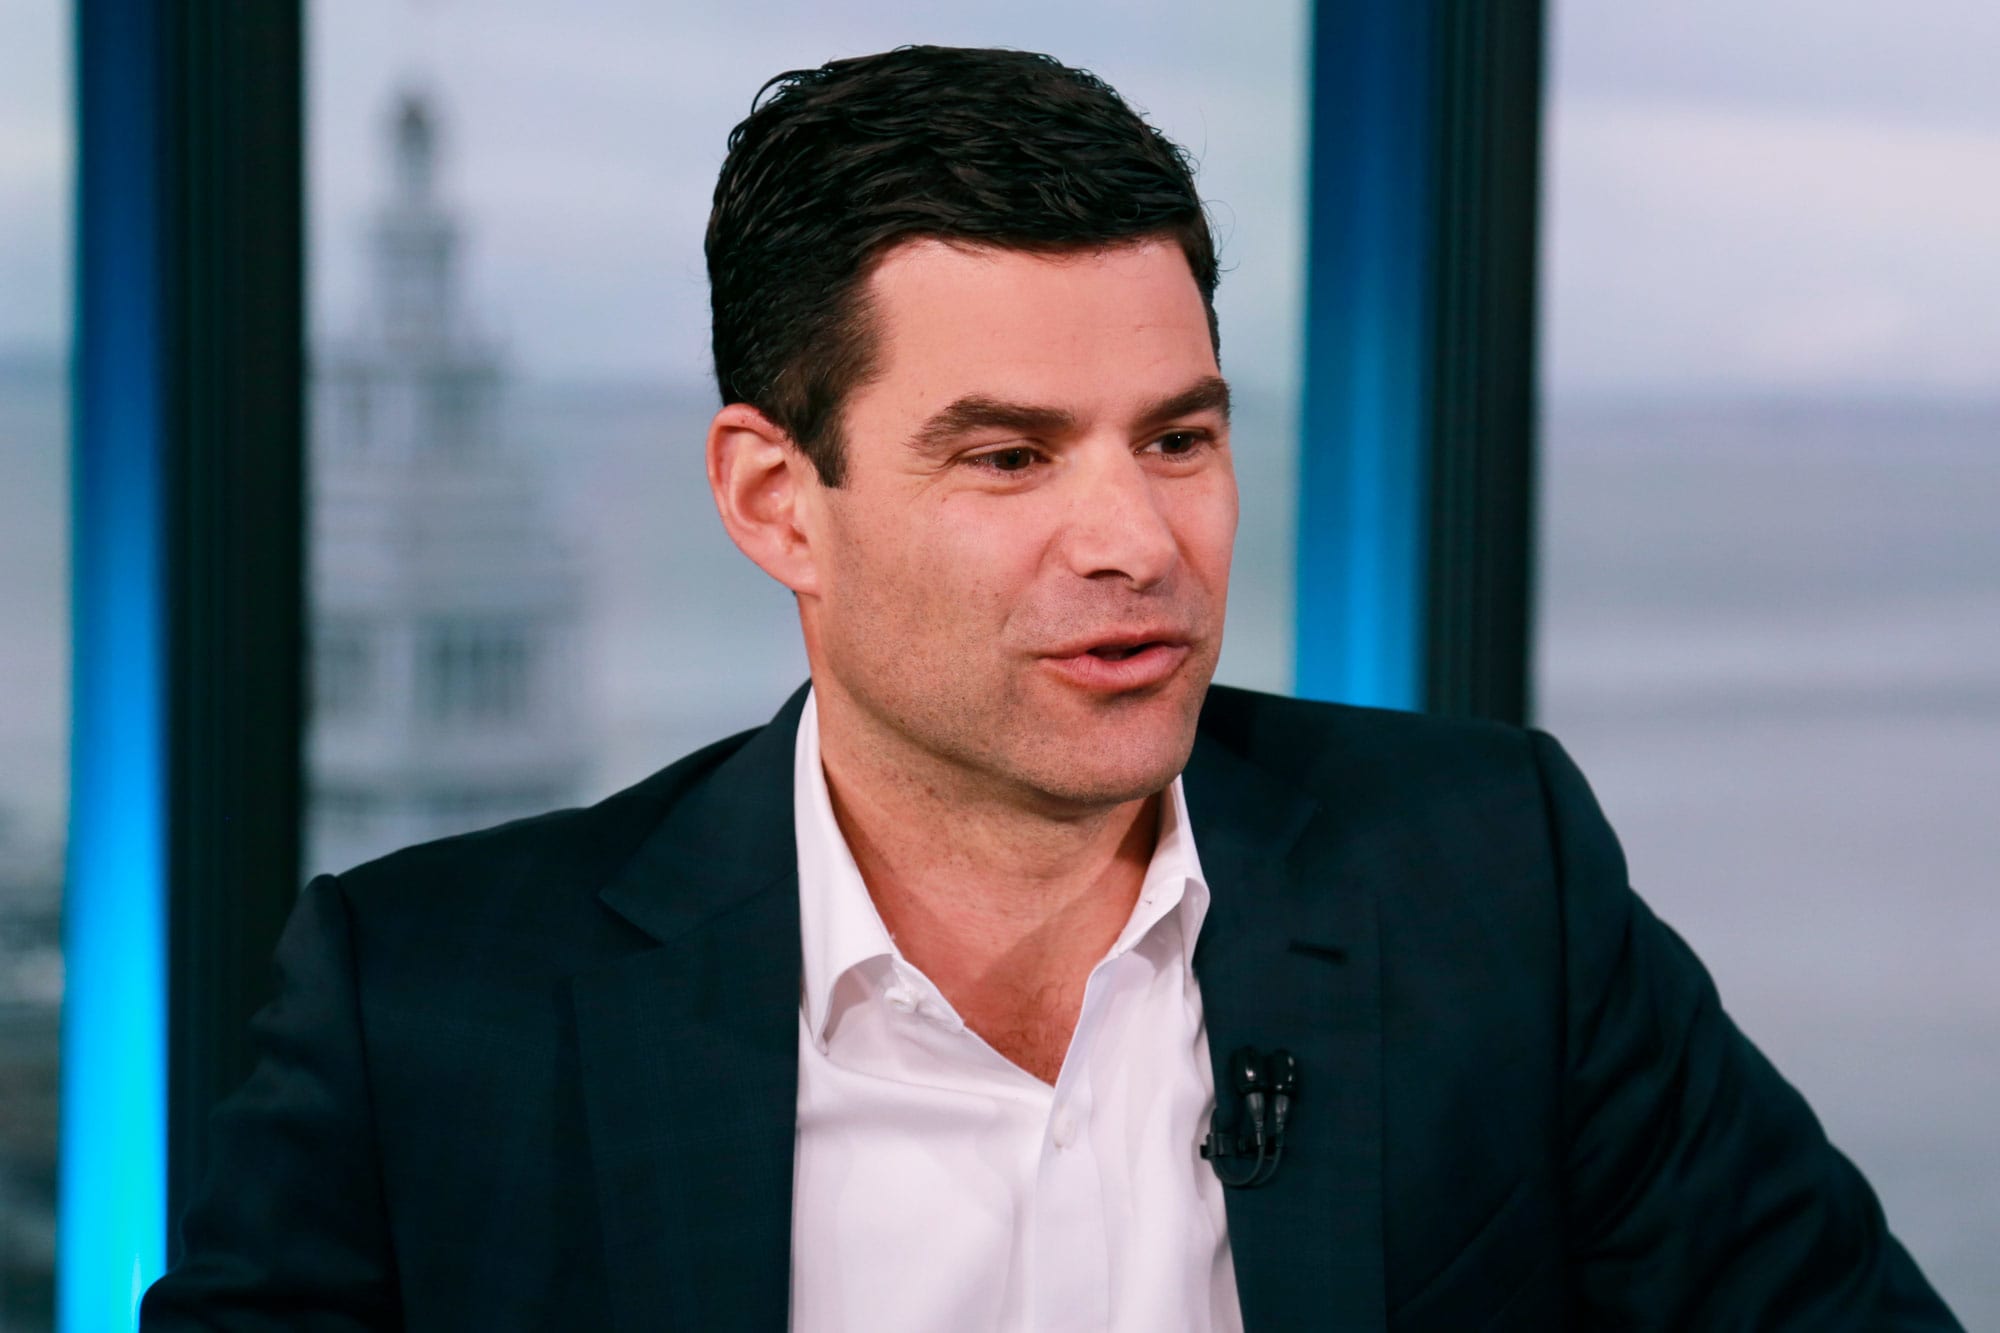 Twitter CFO Ned Segal says e-commerce is becoming more important for the company